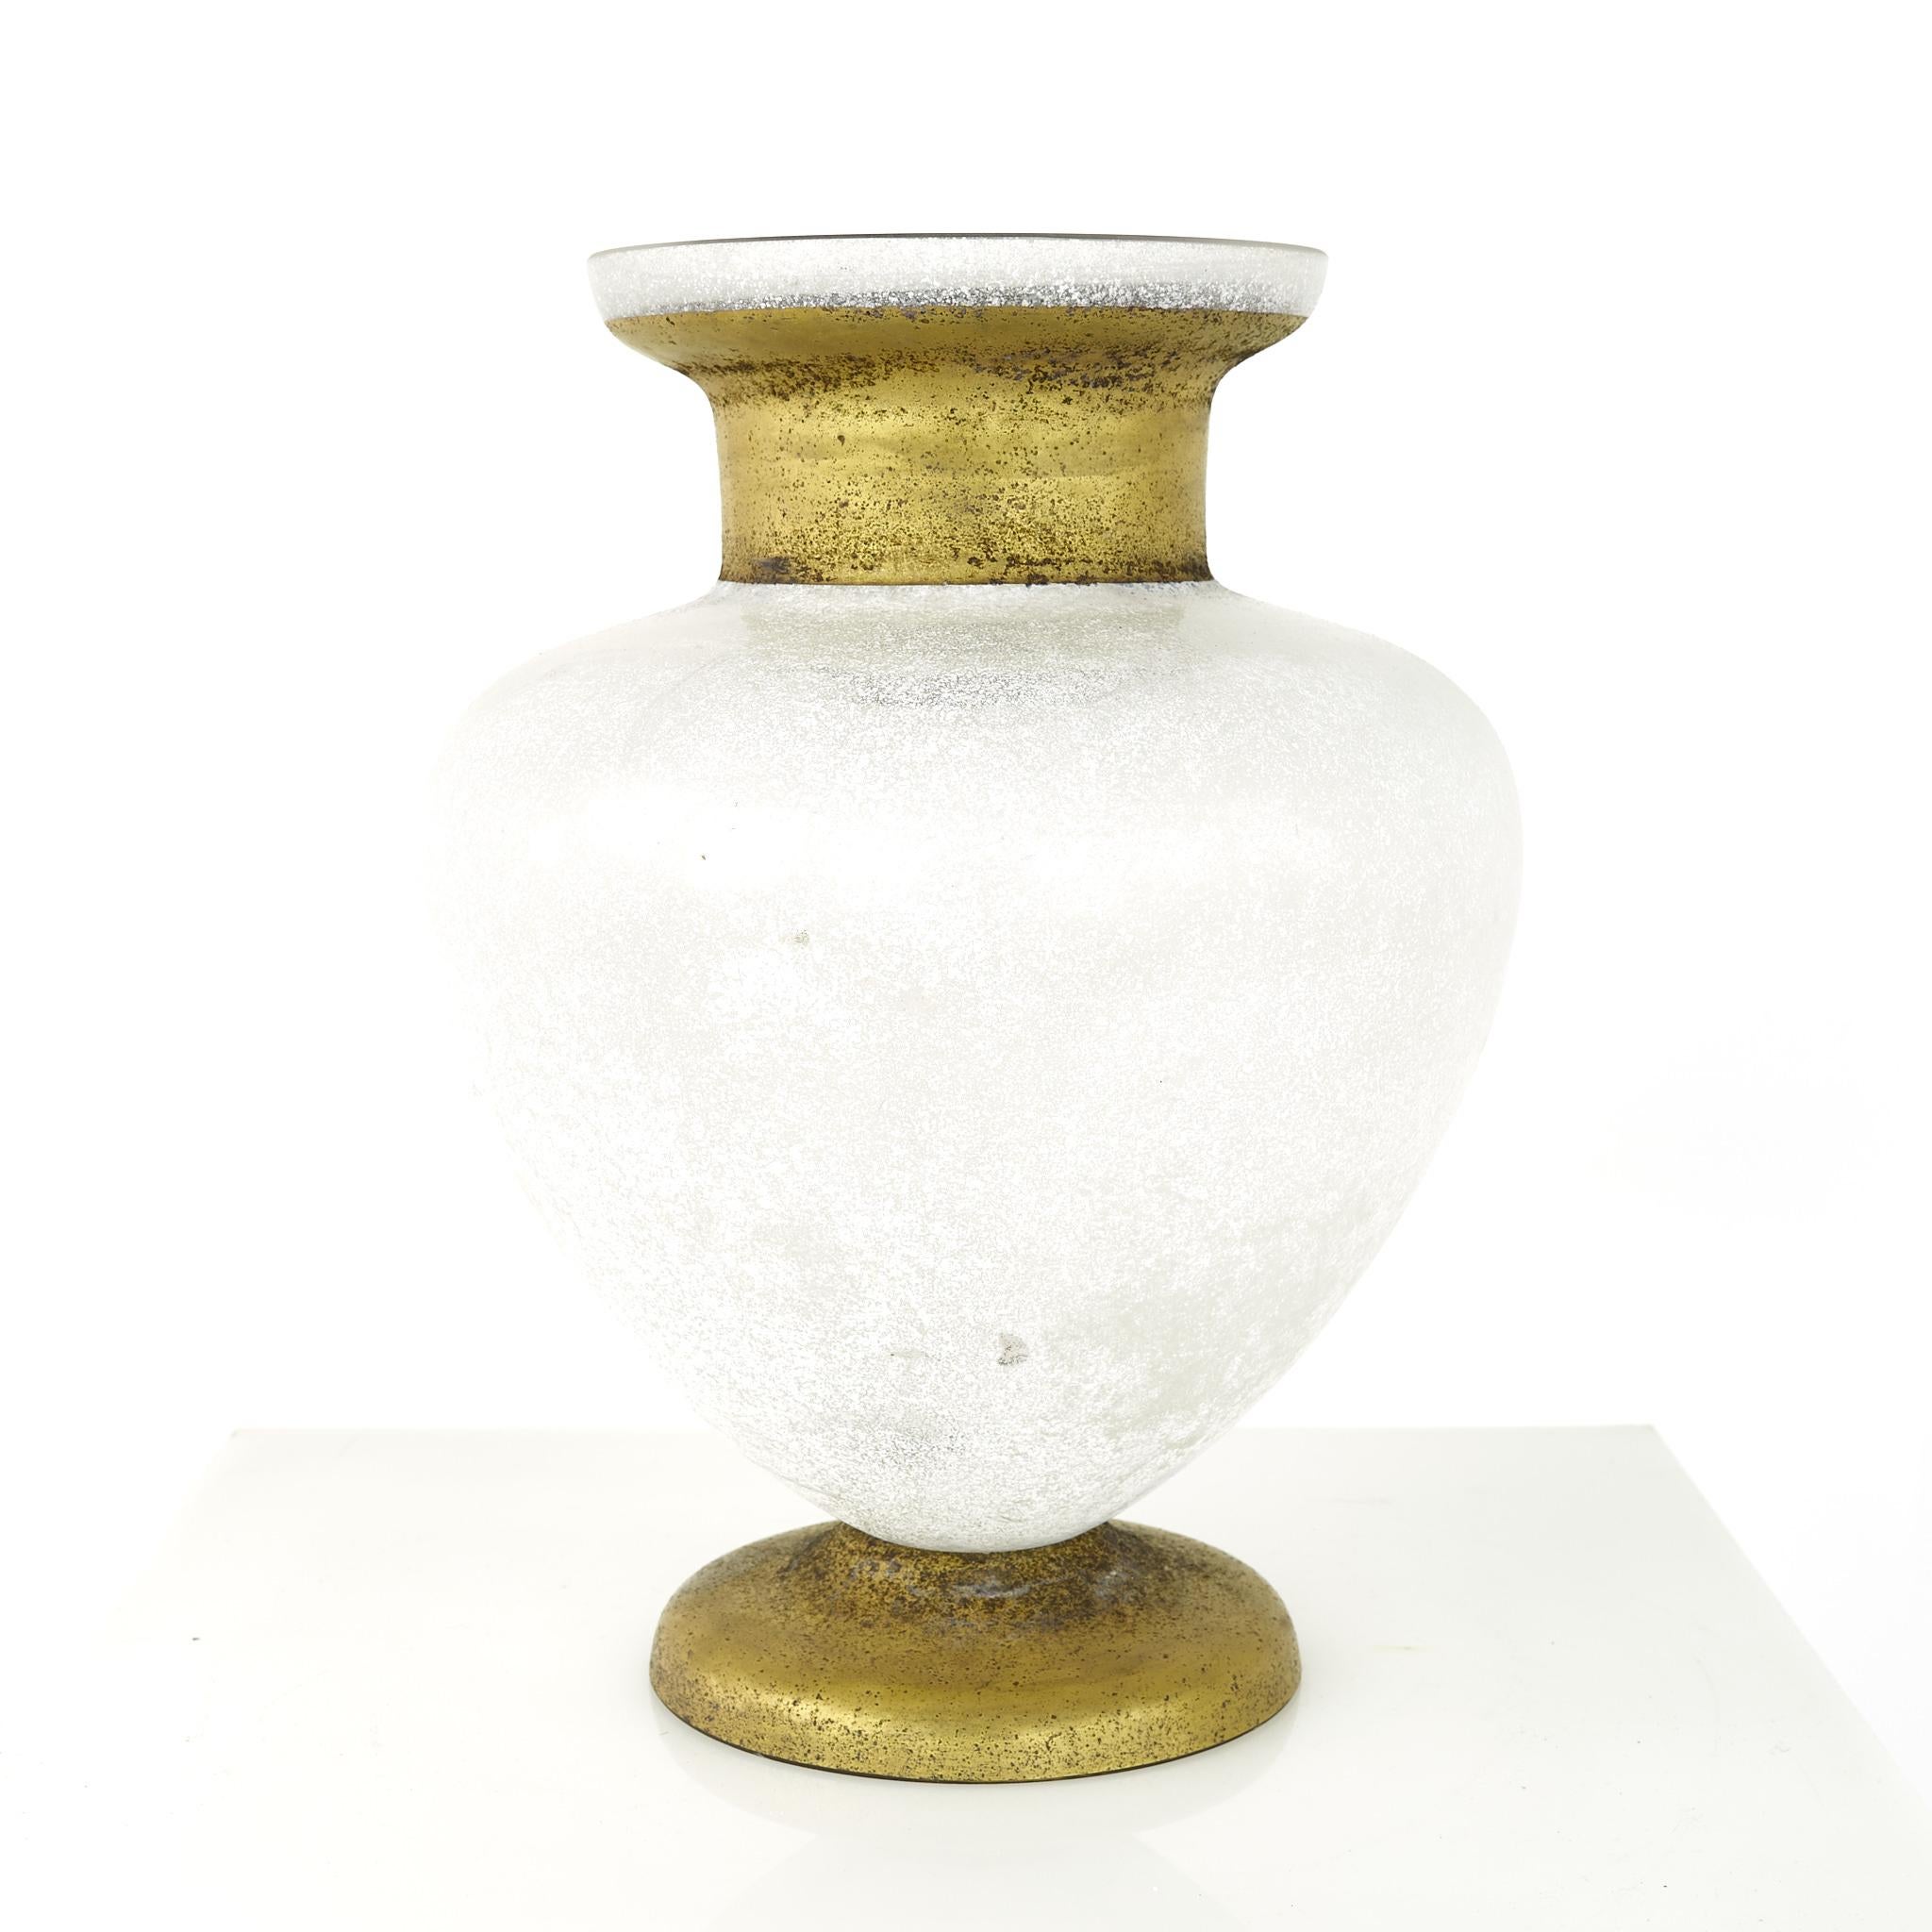 Mid century frosted art glass gold vase

This vase measures: 12 wide x 12 deep x 14 inches high

We take our photos in a controlled lighting studio to show as much detail as possible. We do not photoshop out blemishes. 

We keep you fully